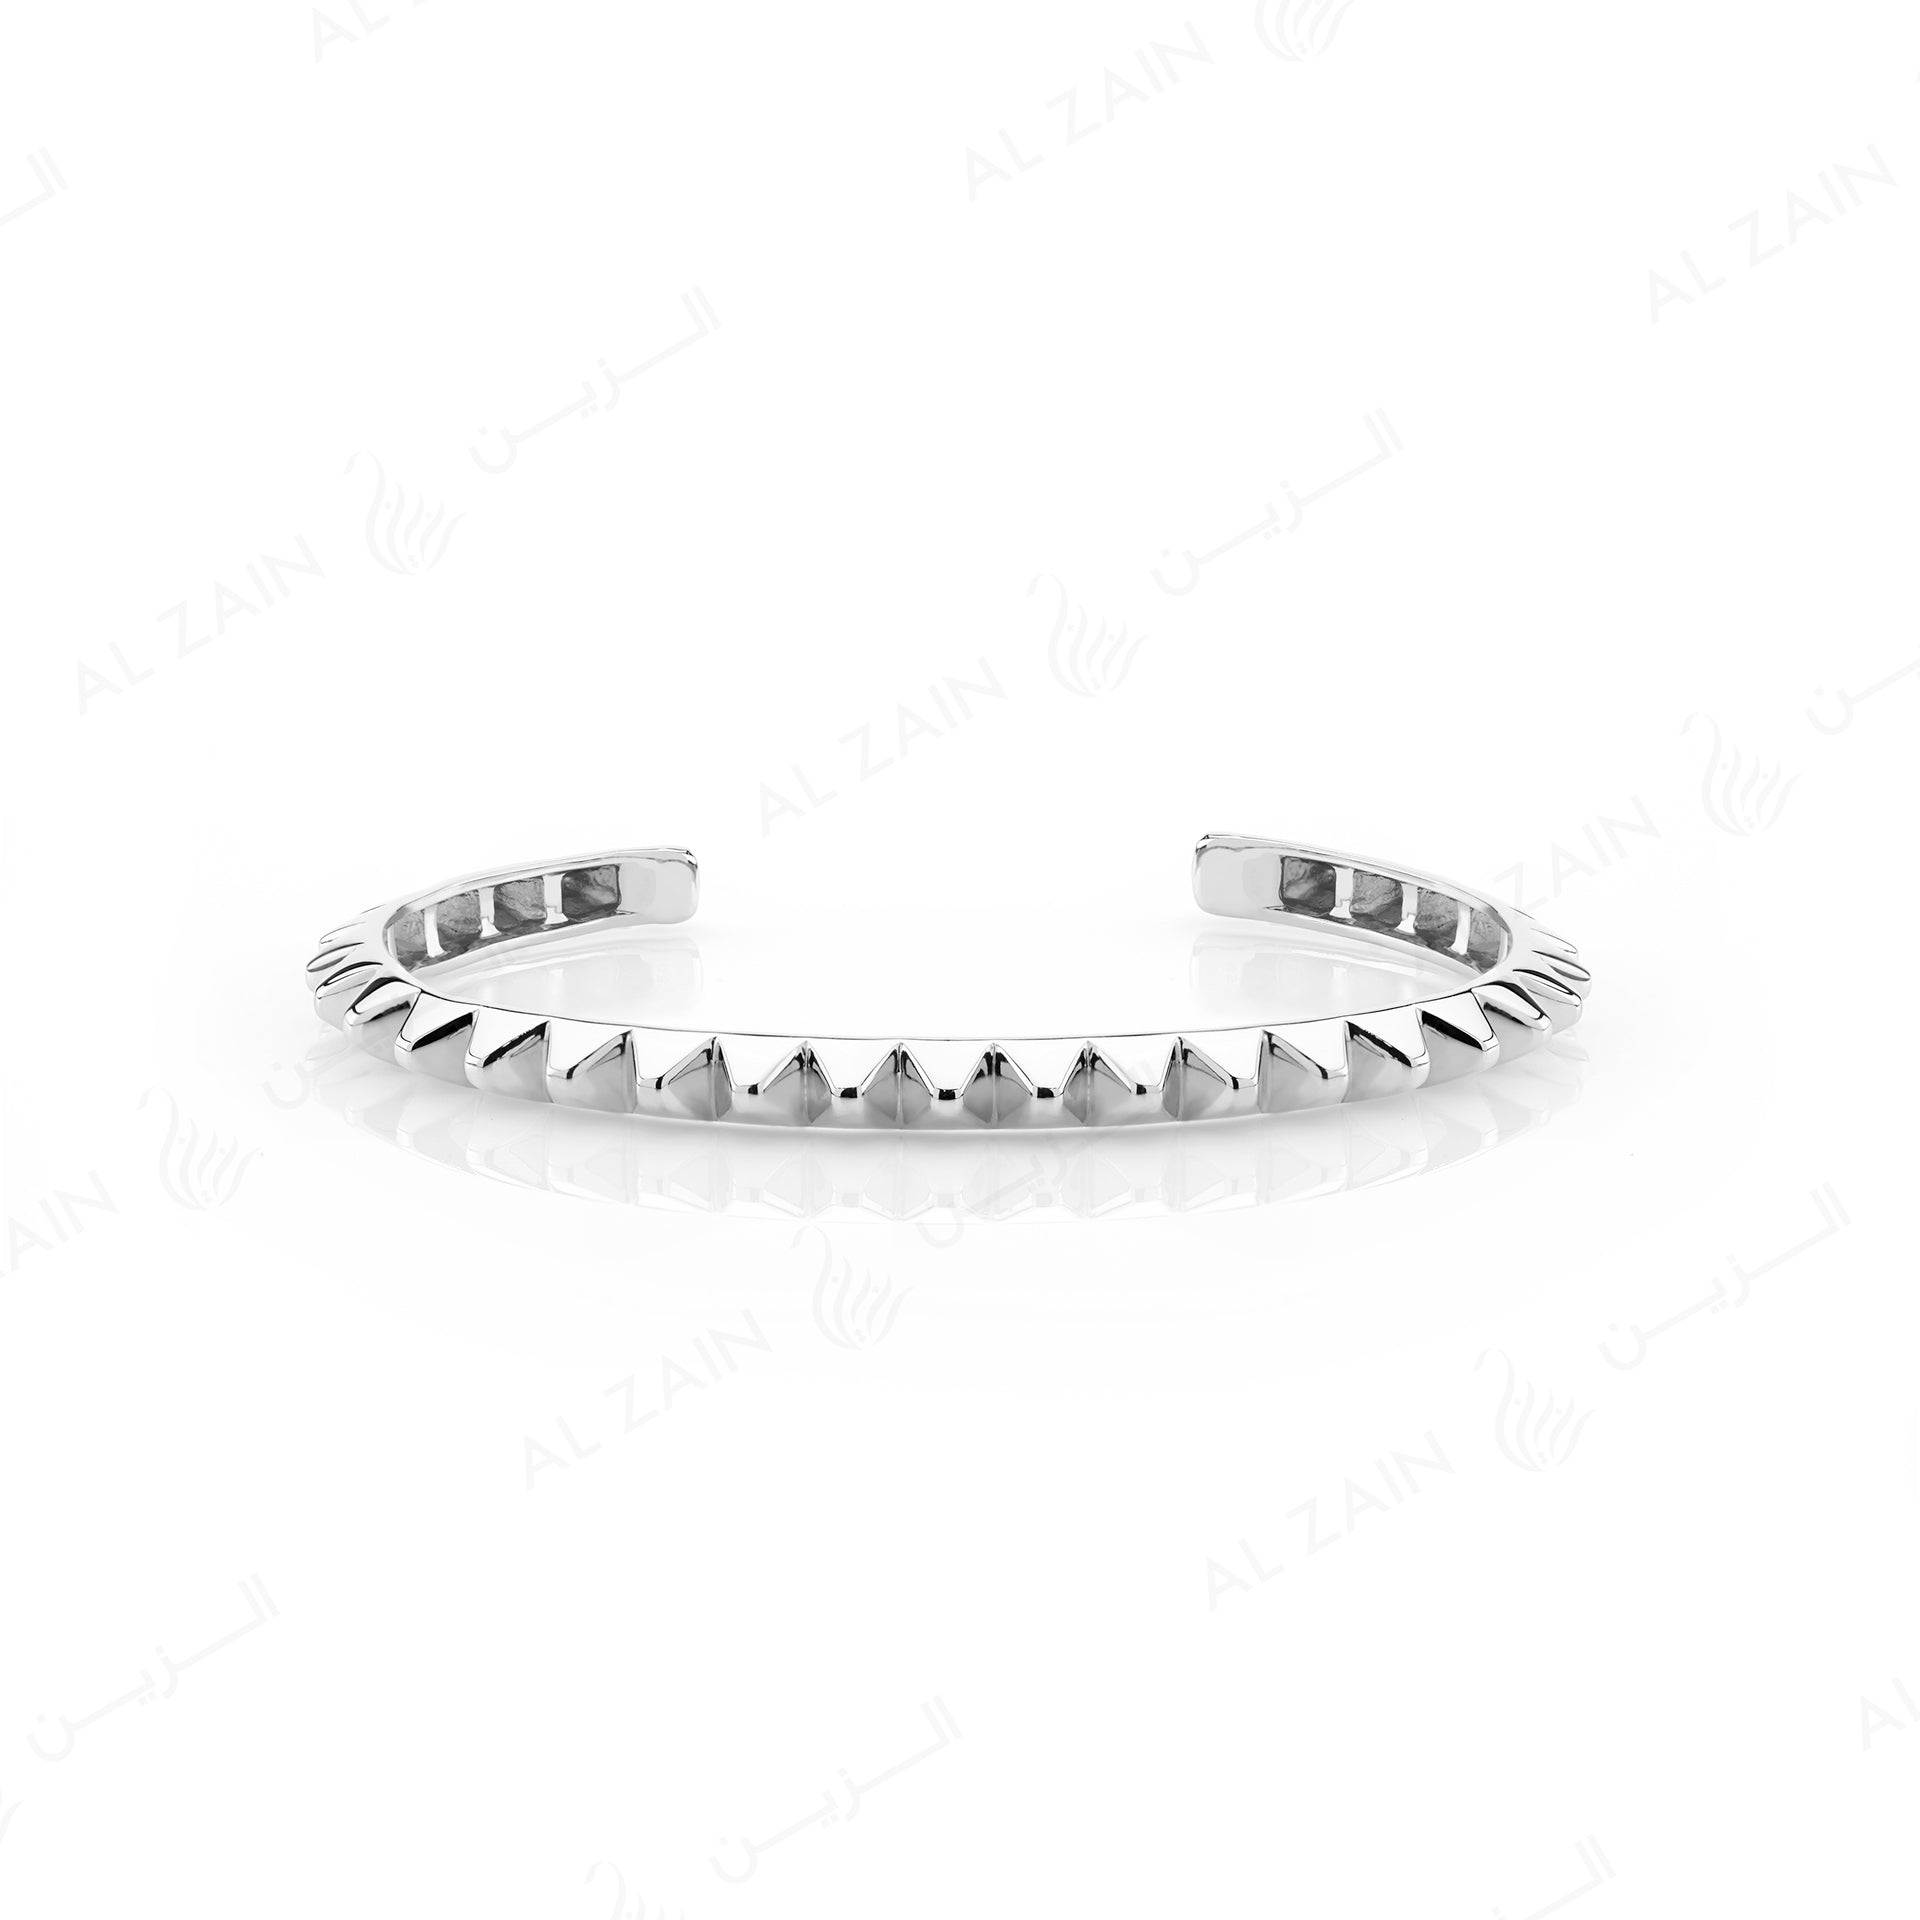 Hab El Hayl 2nd Edition Bangle in White Gold with Diamonds on tip